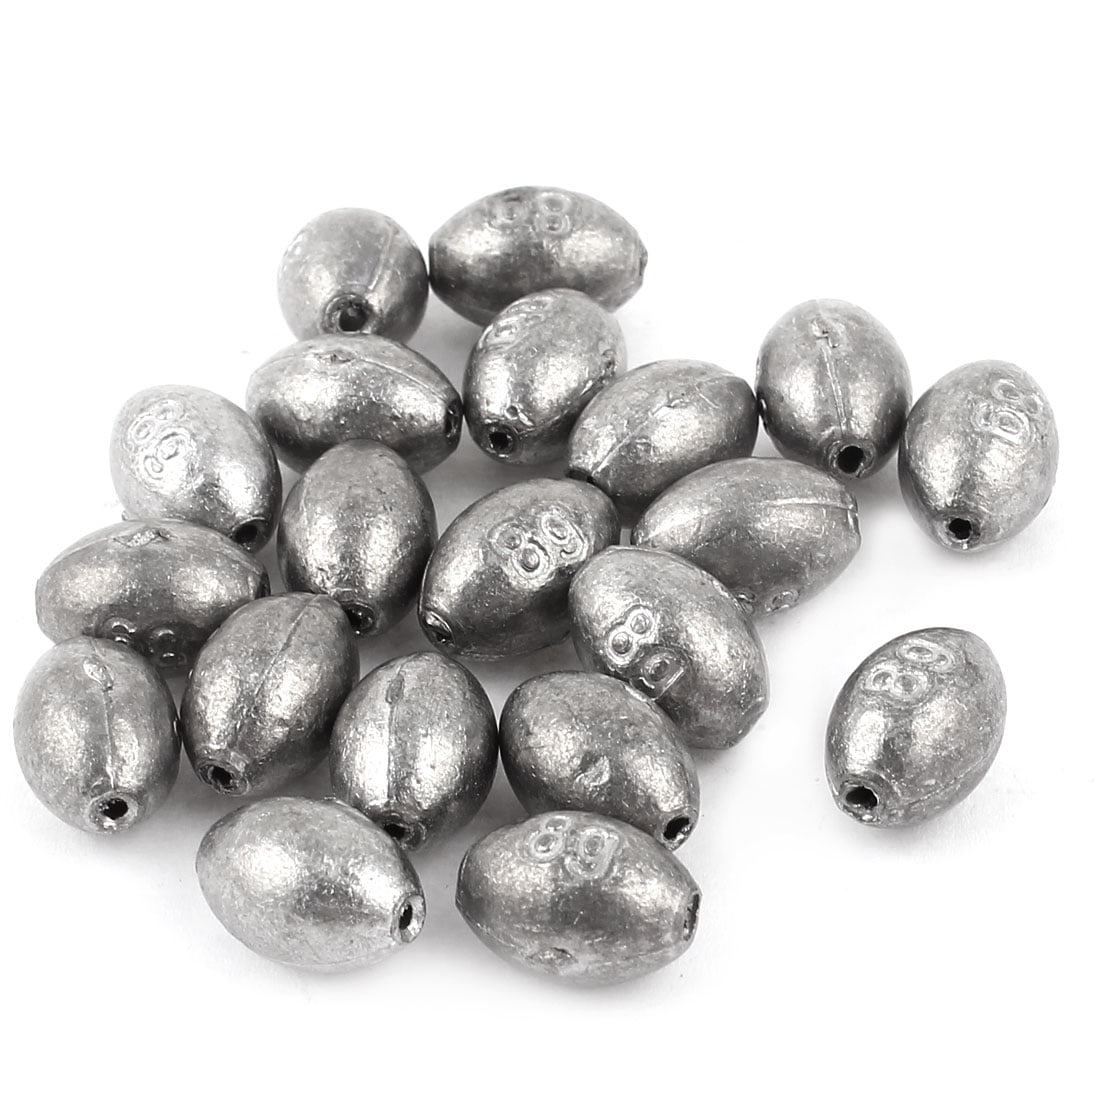 20 COUNT BAG OF 6 OZ LEAD EGG SINKERS     "FREE SHIPPING" 